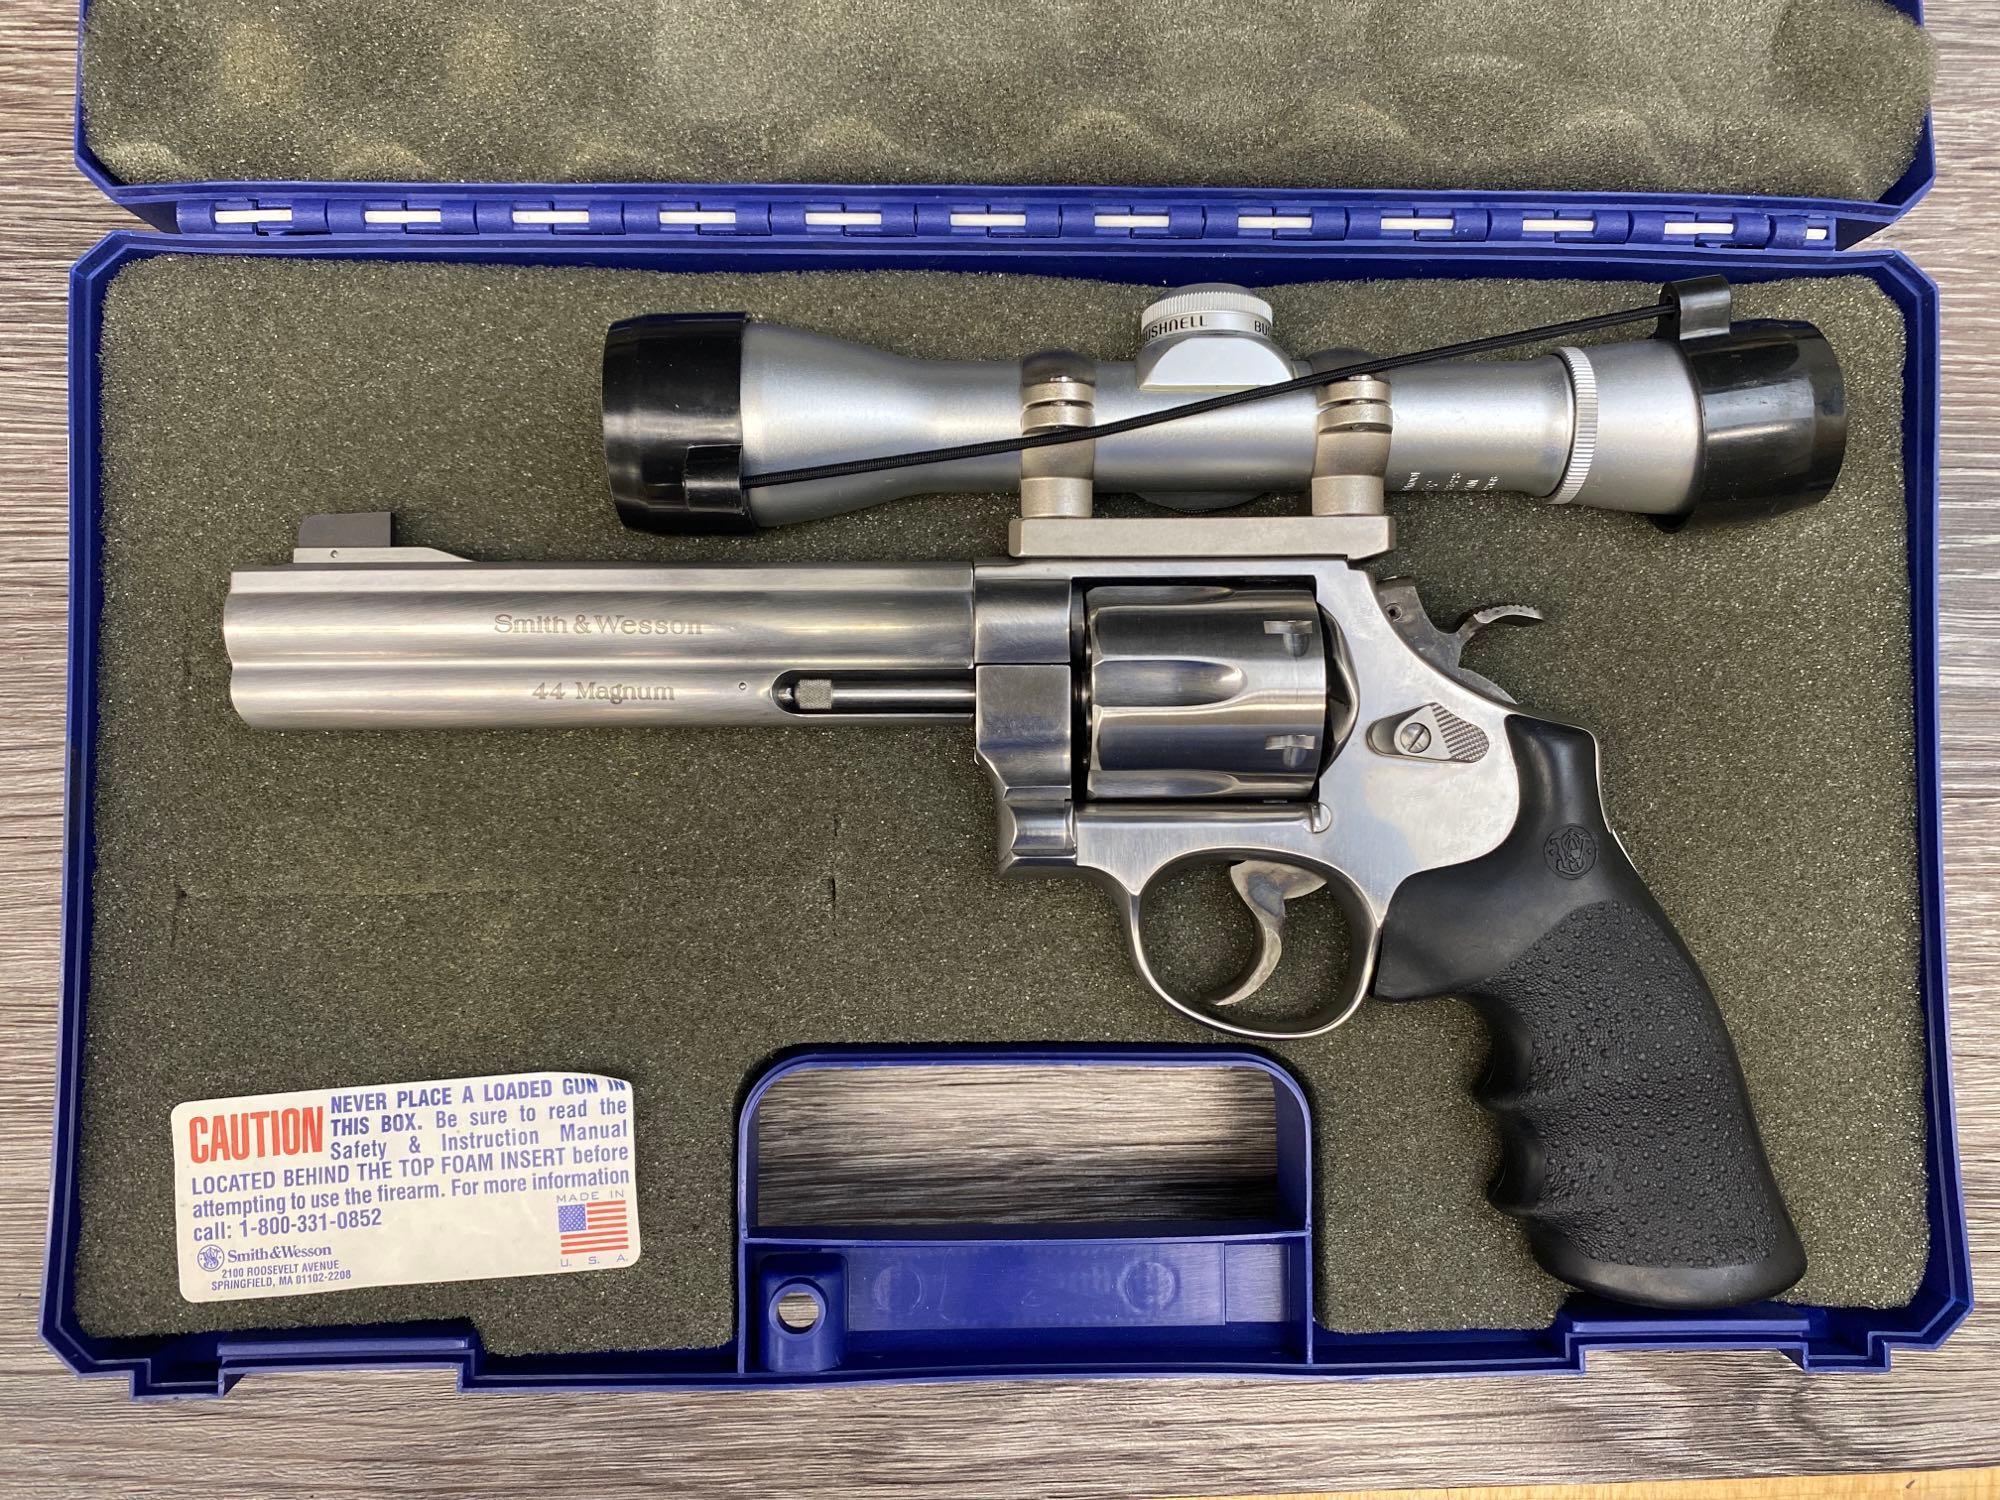 S&W MOD. 629-4 CLASSIC .44 MAG. CAL. STAINLESS STEEL DA REVOLVER W/S&W HARDCASE/DOCS/BUSHNELL SCOPE.